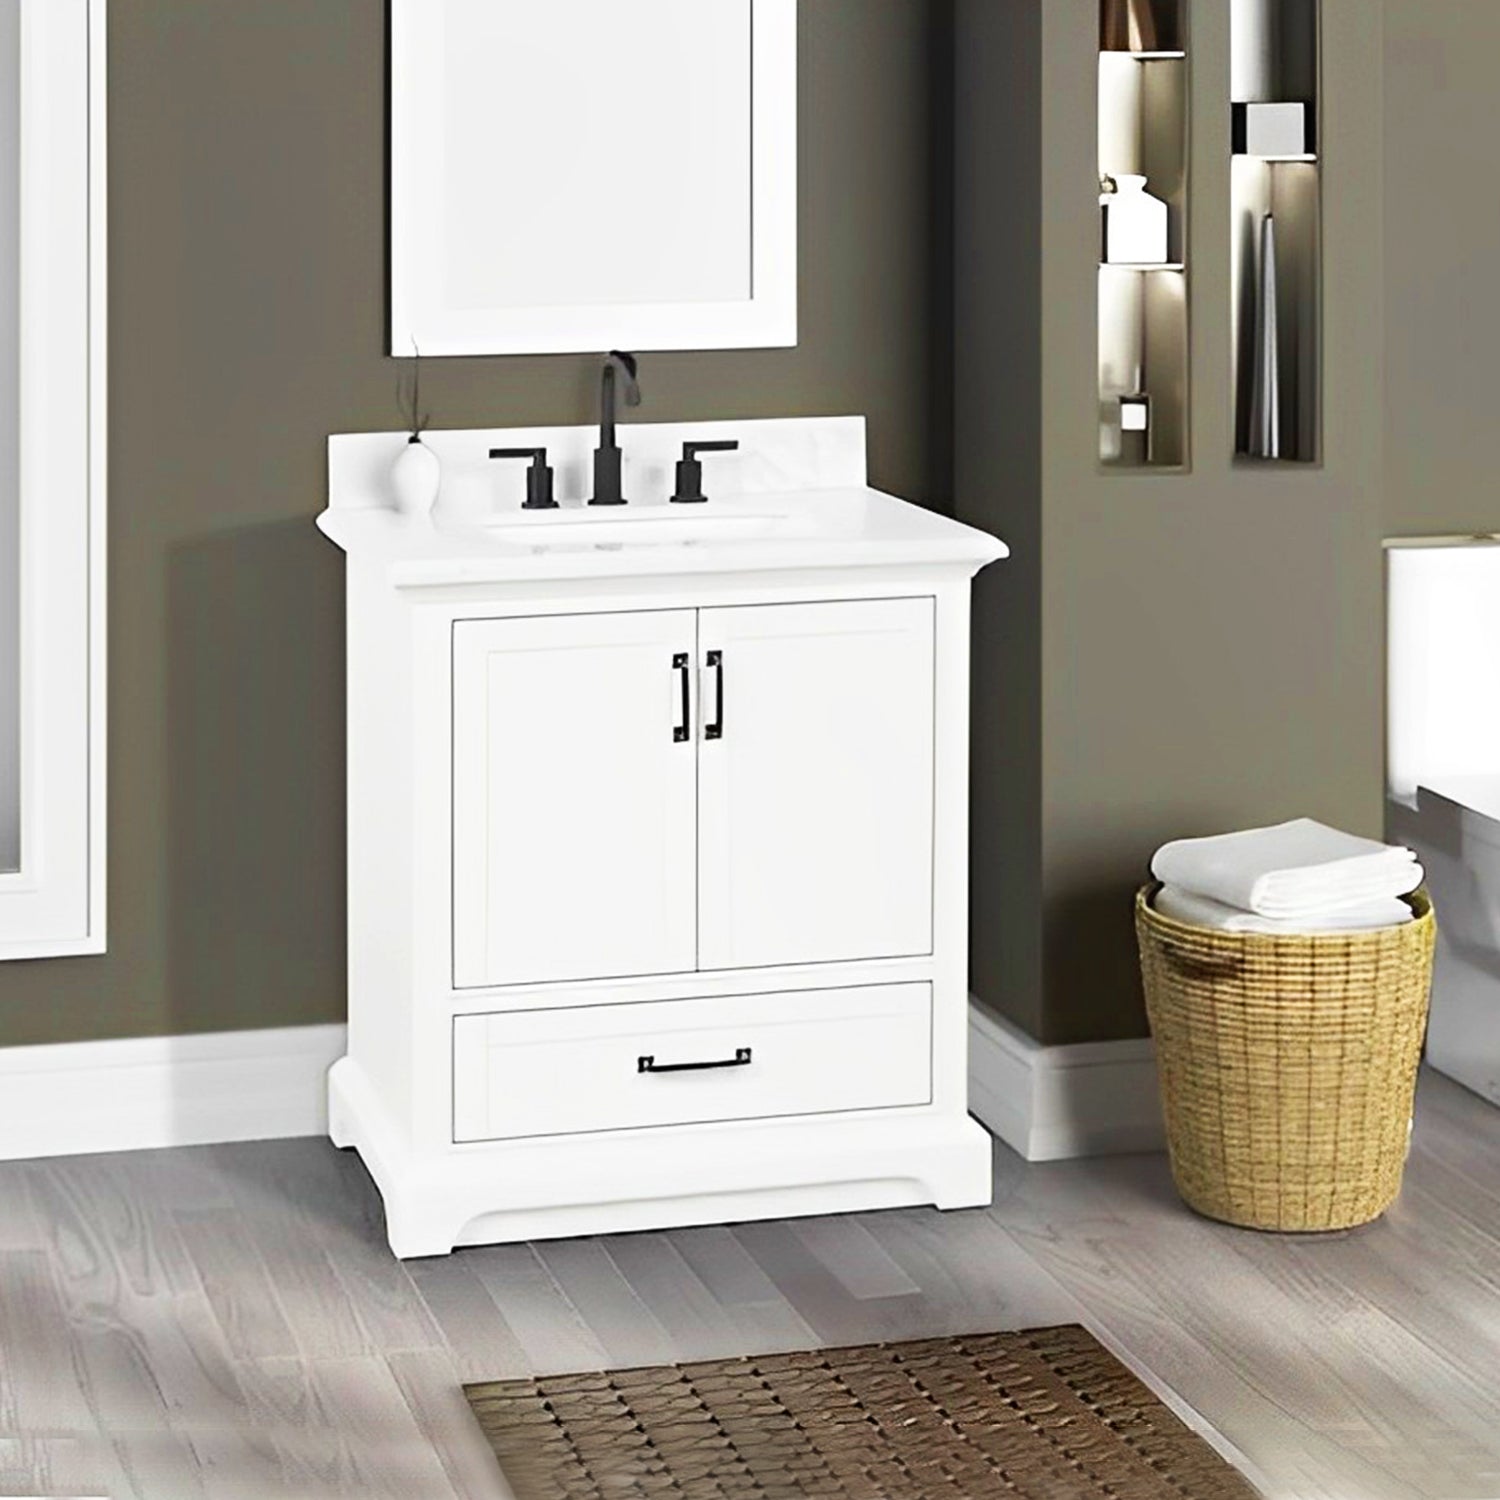 Bathroom Sink Cover for Counter Space. Makeup Mat for Vanity and